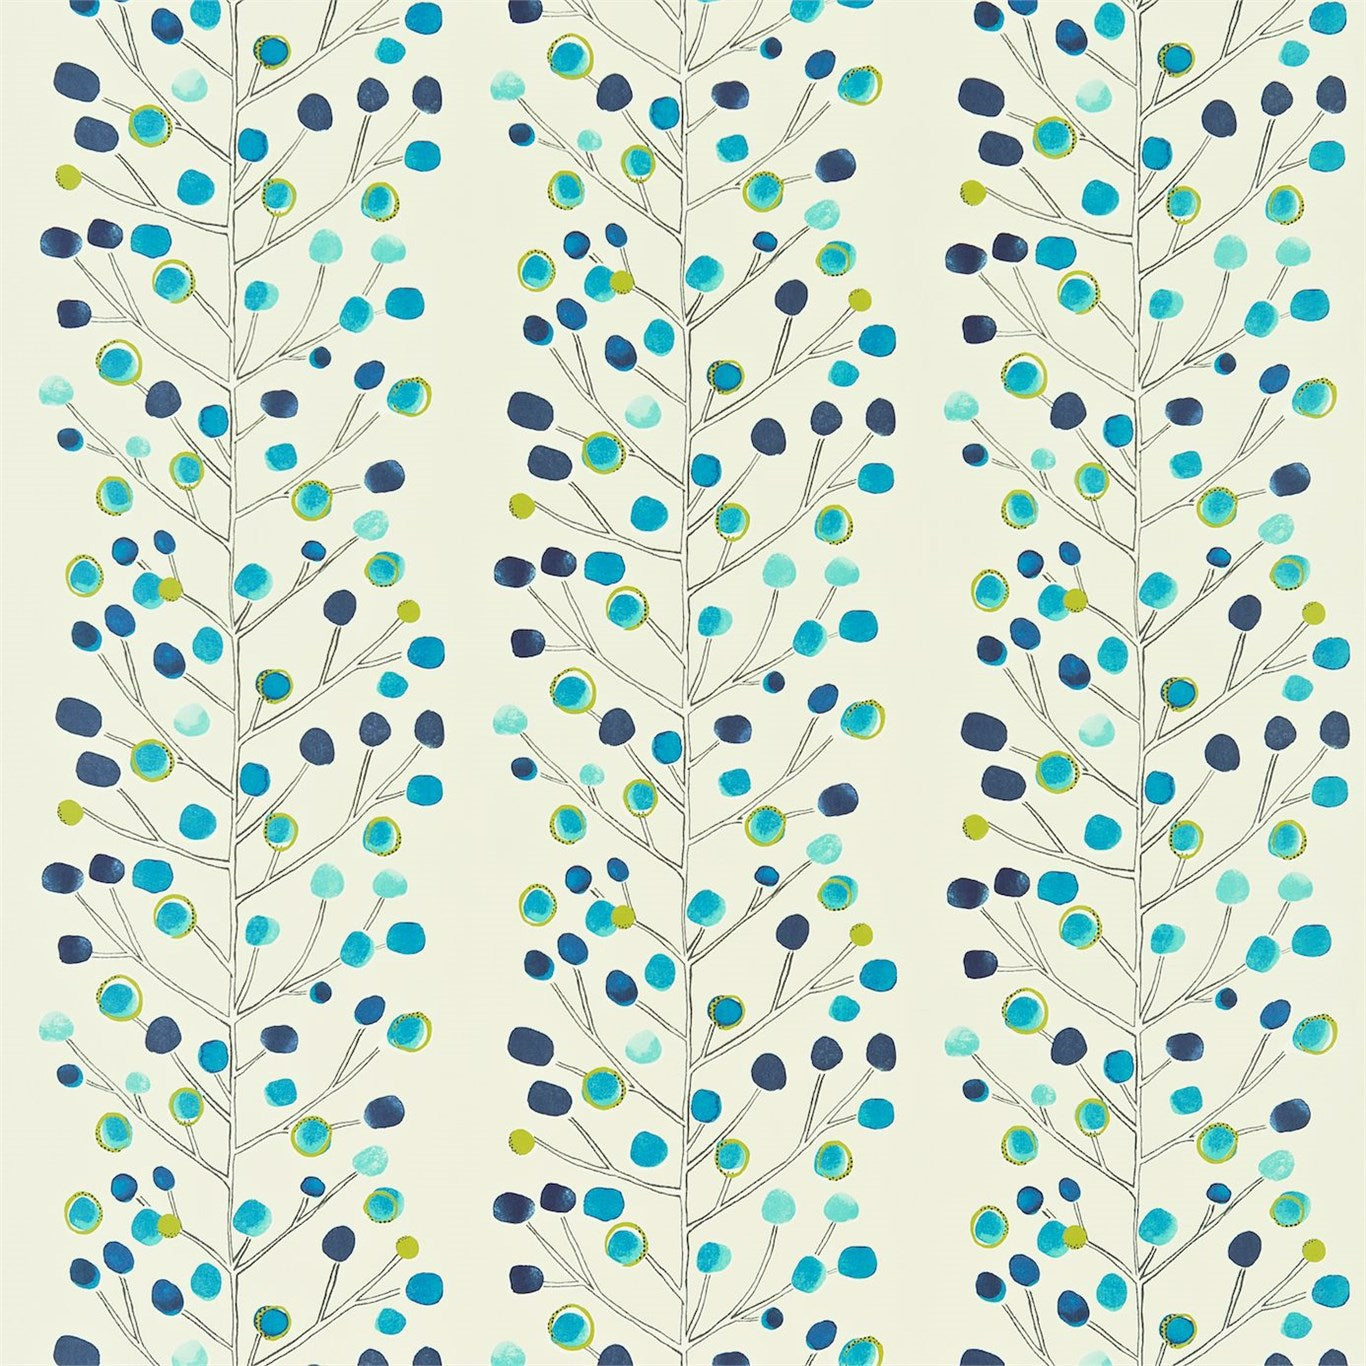 Berry Tree Fabric by Scion - NMEL120049 - Peacock Powder Blue Lime And Neutral